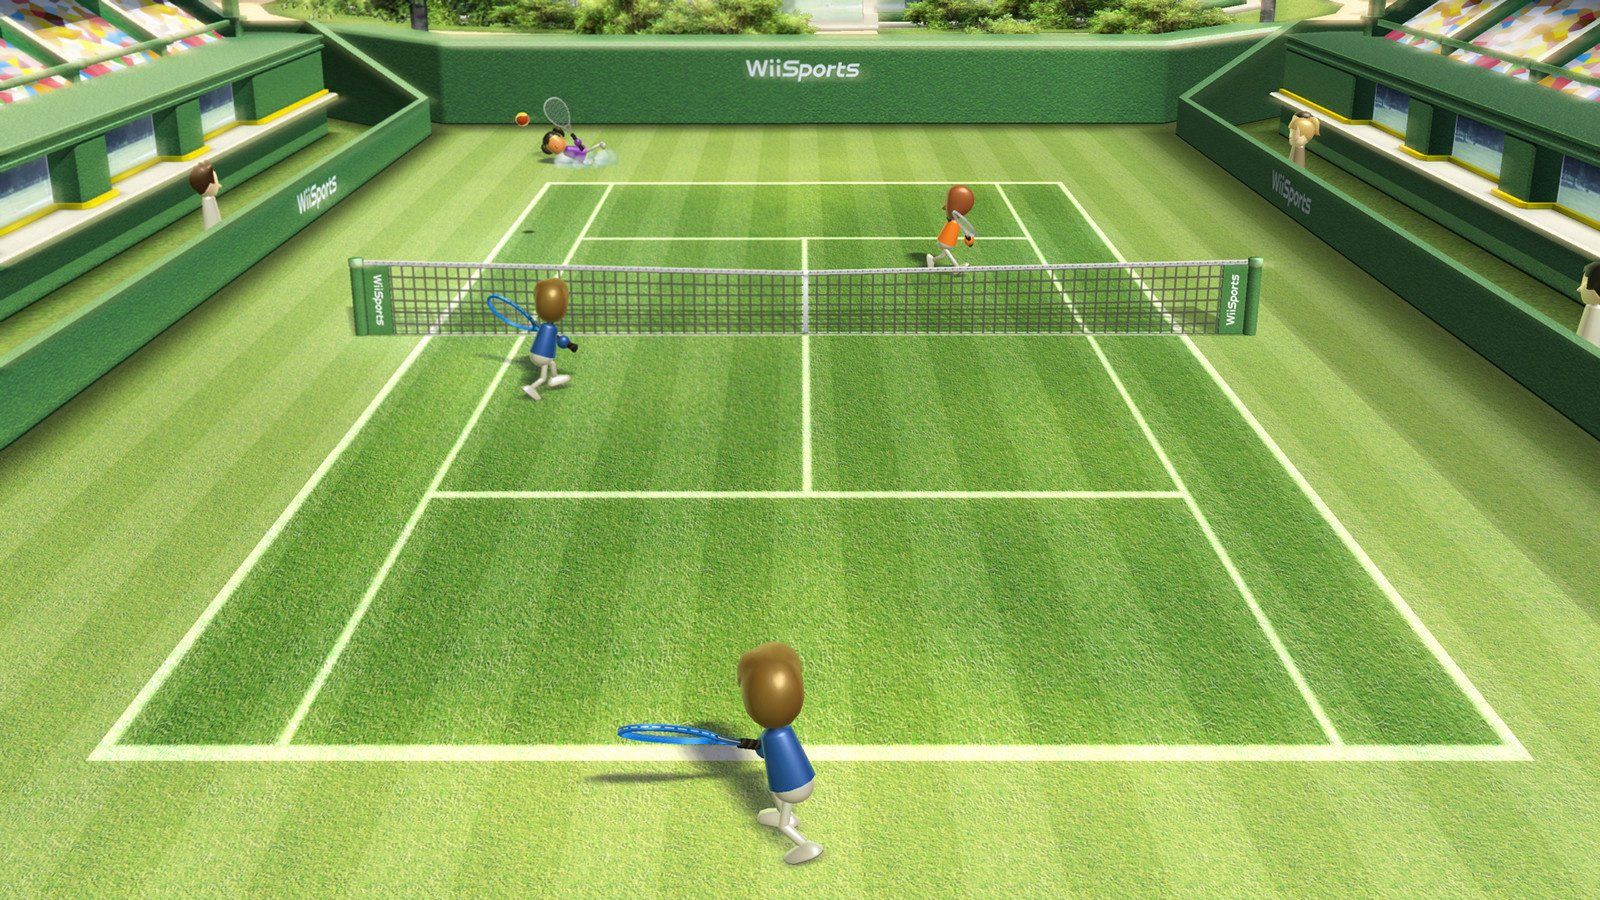 Coronavirus Isolation Seems To Be Causing ﻿A Spike In Wii ﻿Sports' Resale Value